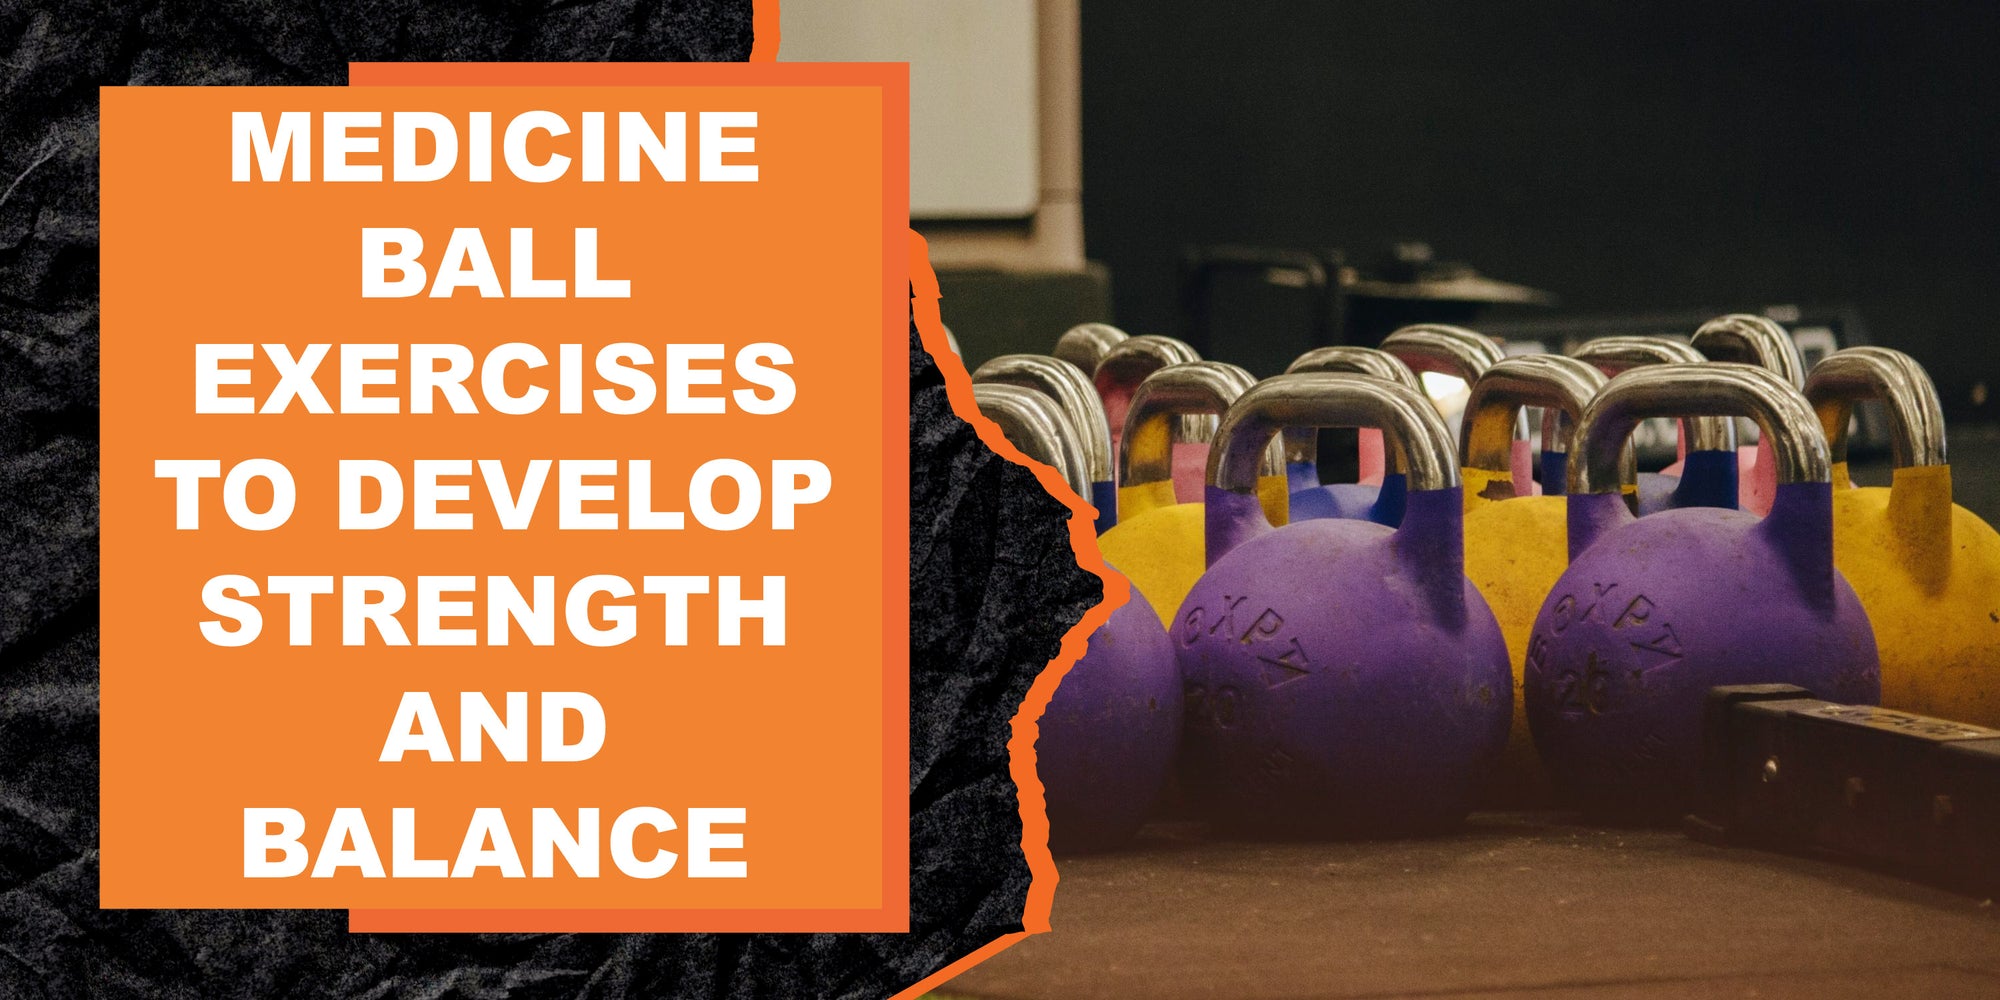 Medicine Ball Exercises to Develop Strength and Balance